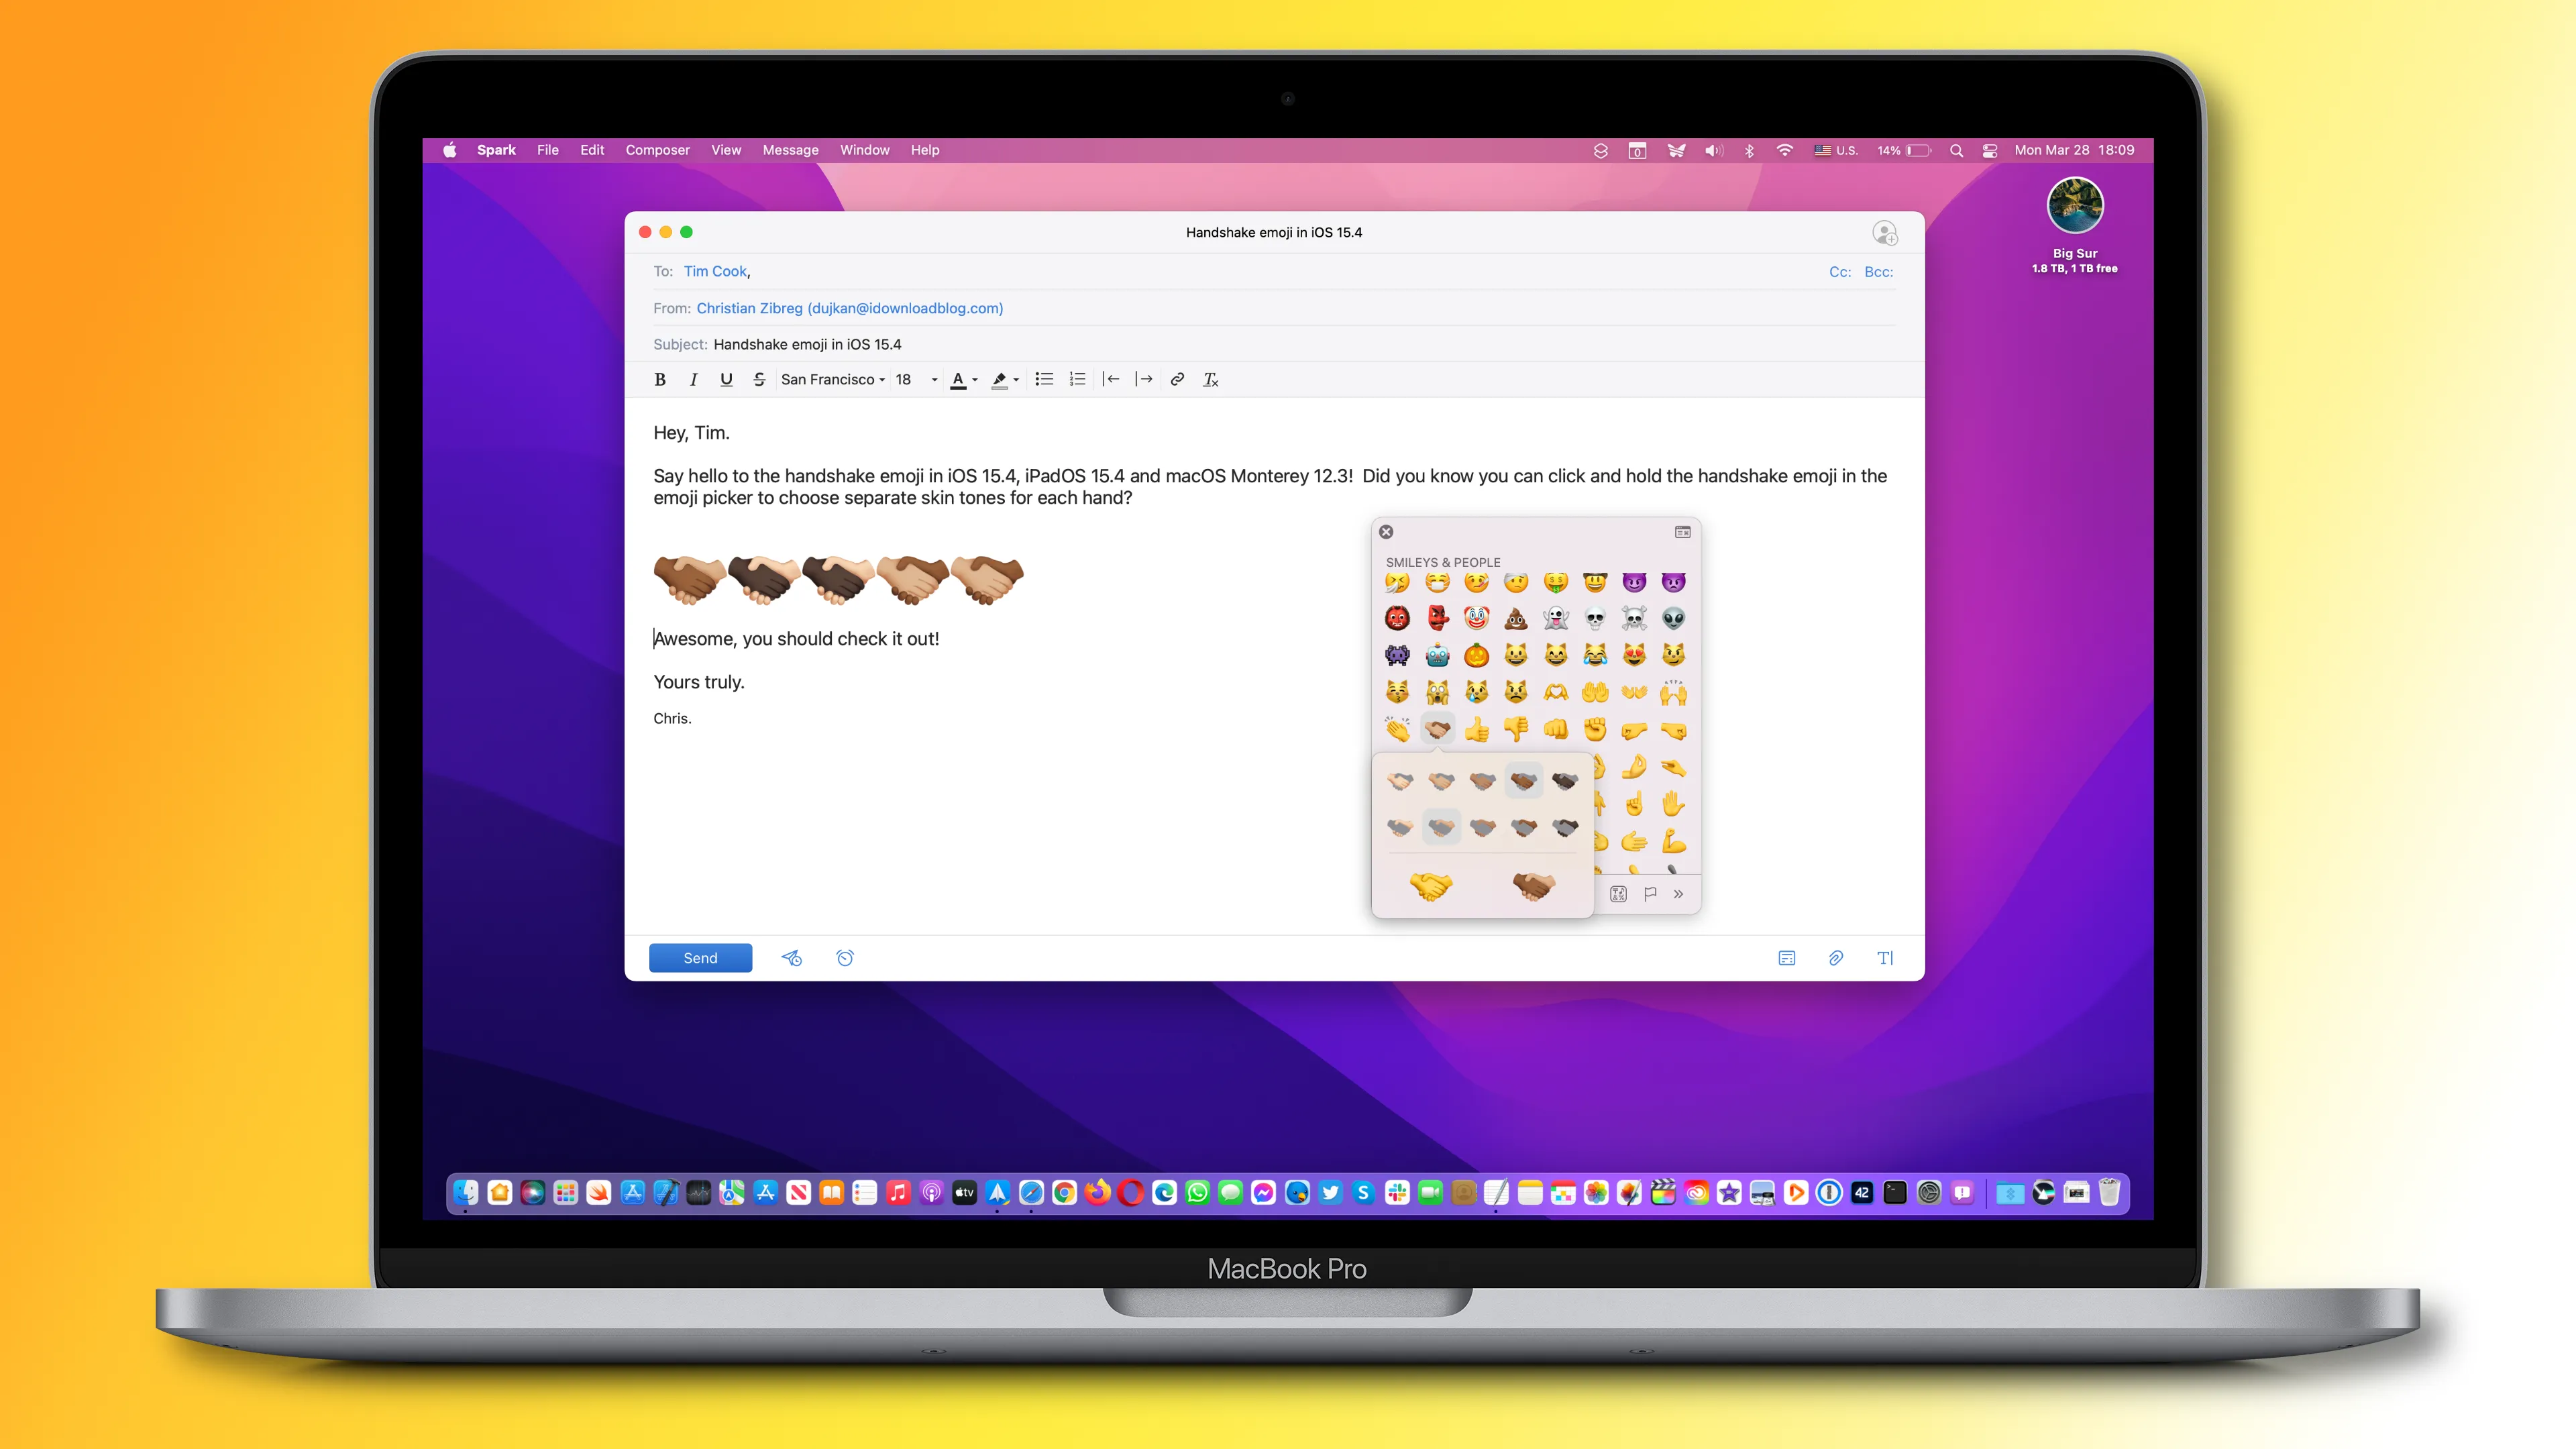 A macOS device screenshot showing setting skin tone separately for each hand of the handshake emoji in Apple Mail for Mac